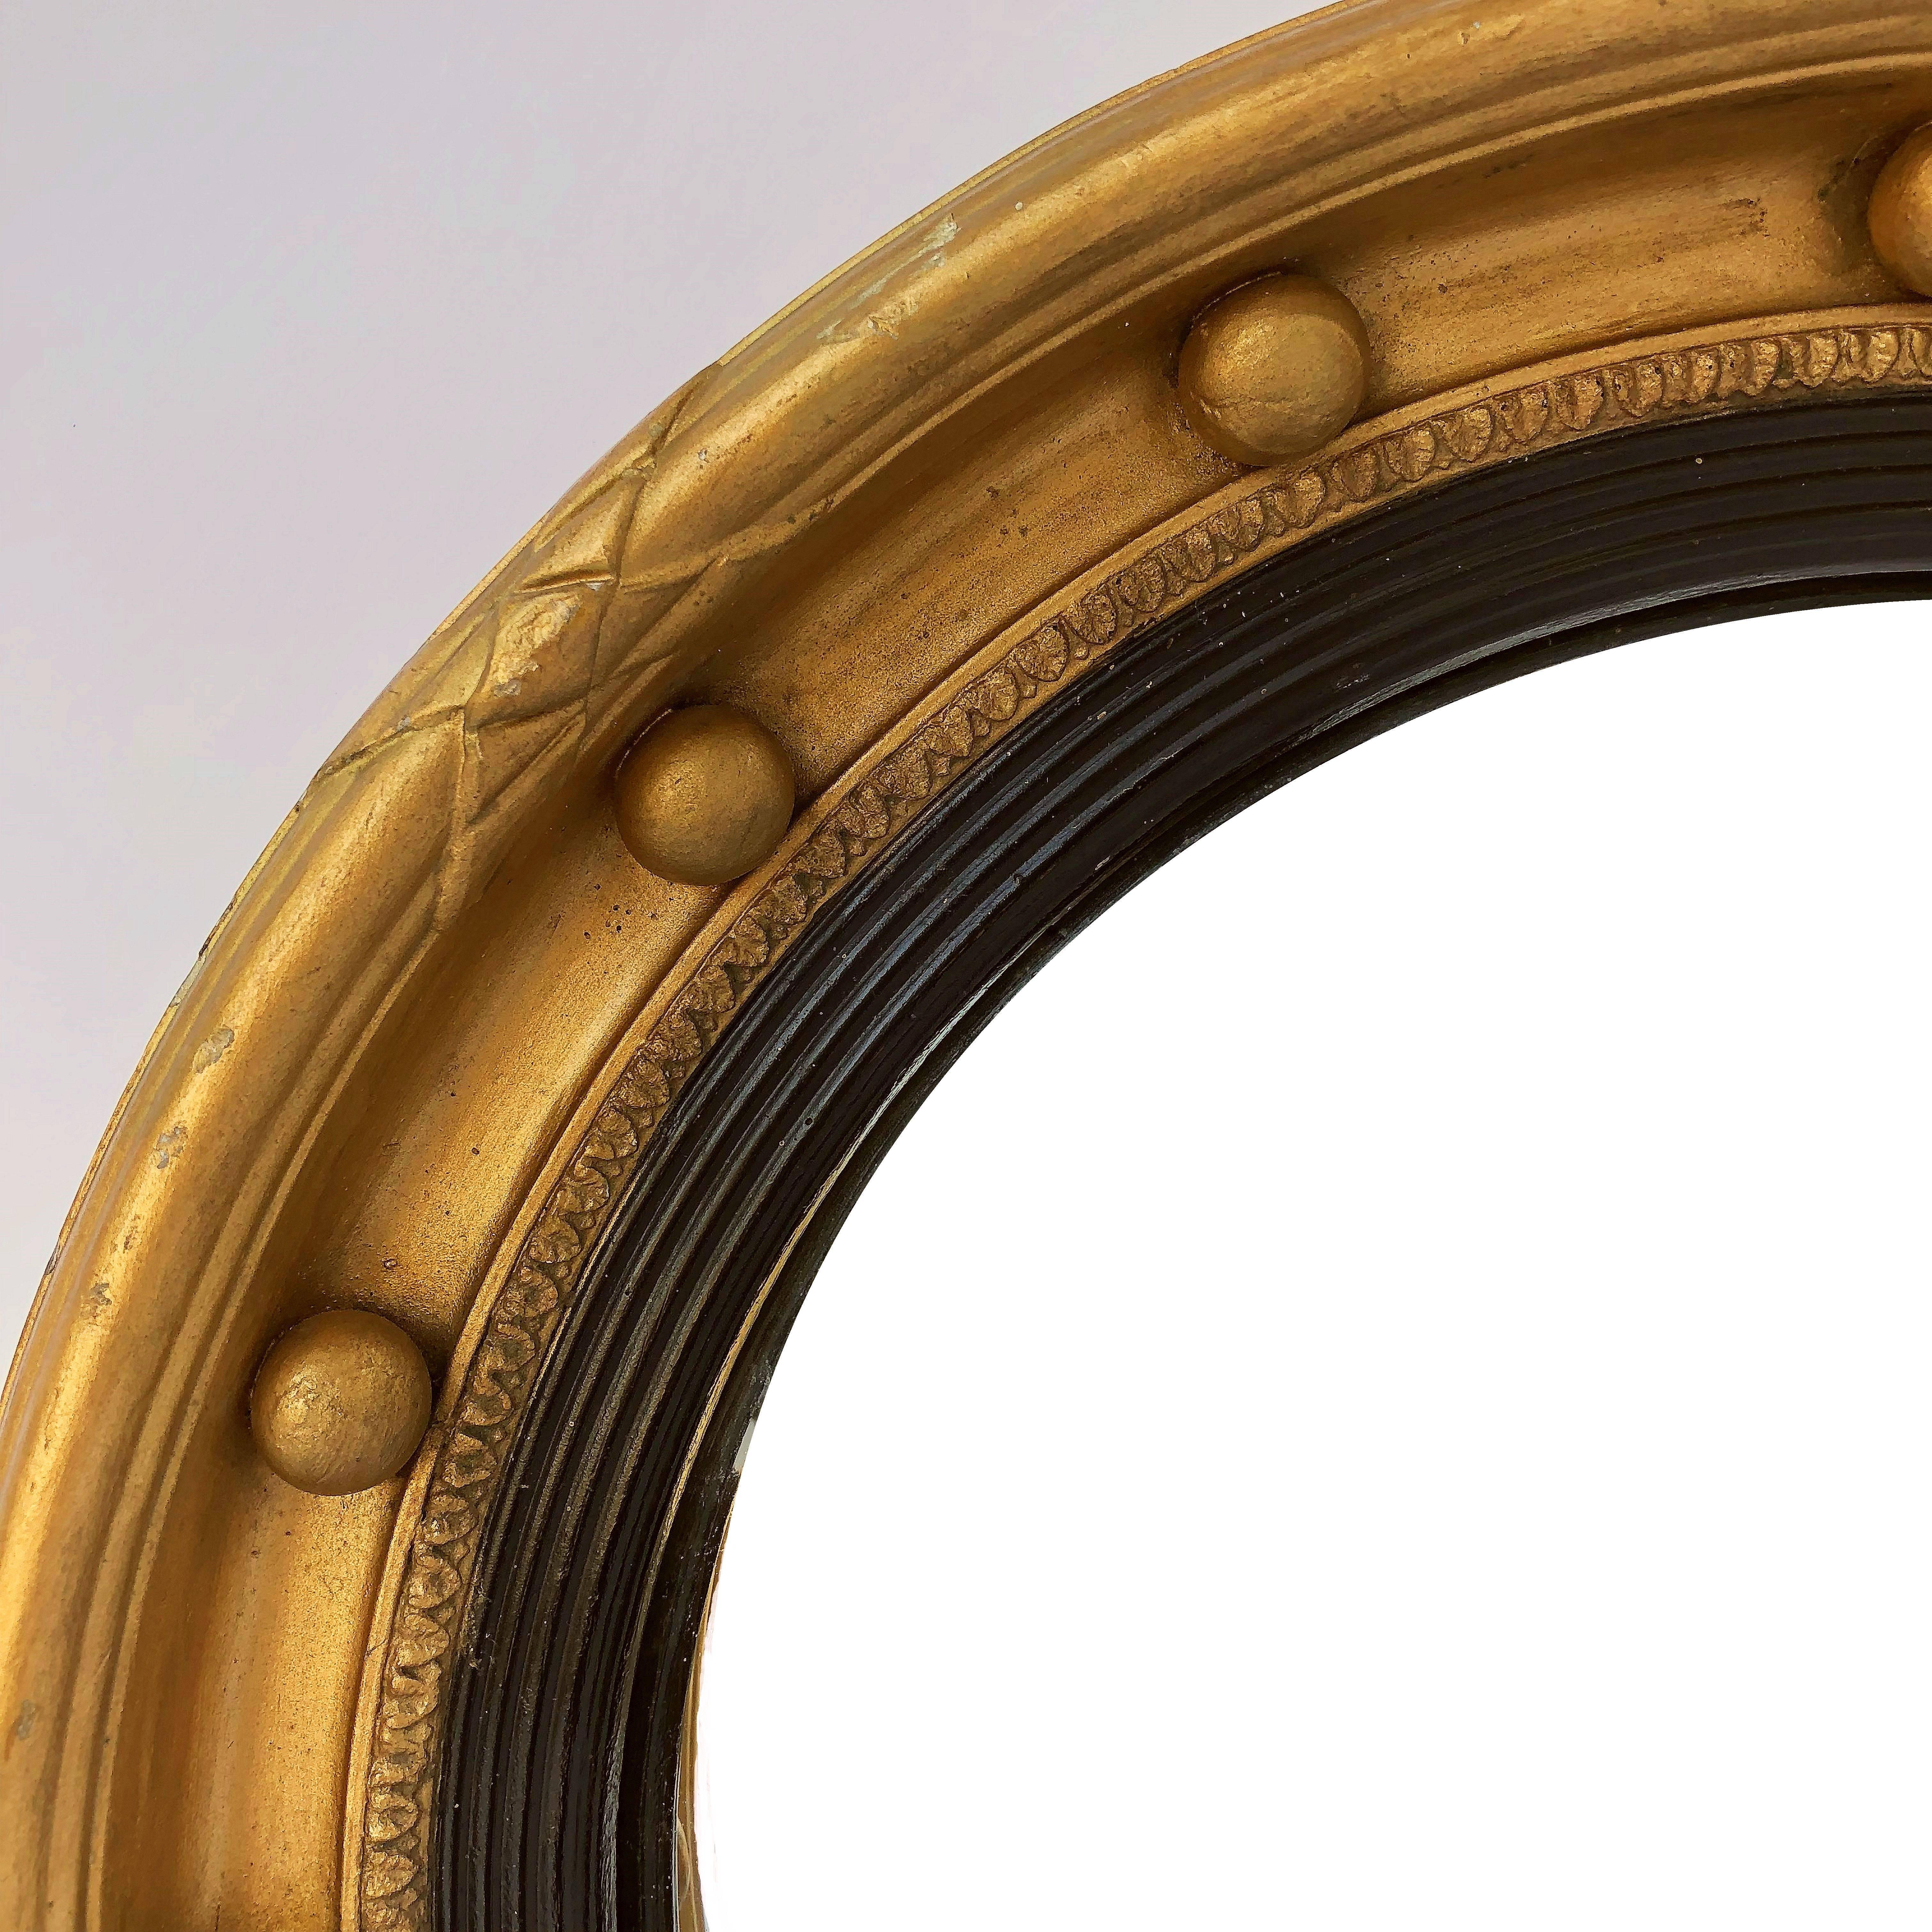 A fine English round convex mirror featuring a Regency design of a moulded gilt and ebonized frame with gilt balls and around the circumference.

Measure: Diameter is 18 1/2 inches
Depth 2 1/4